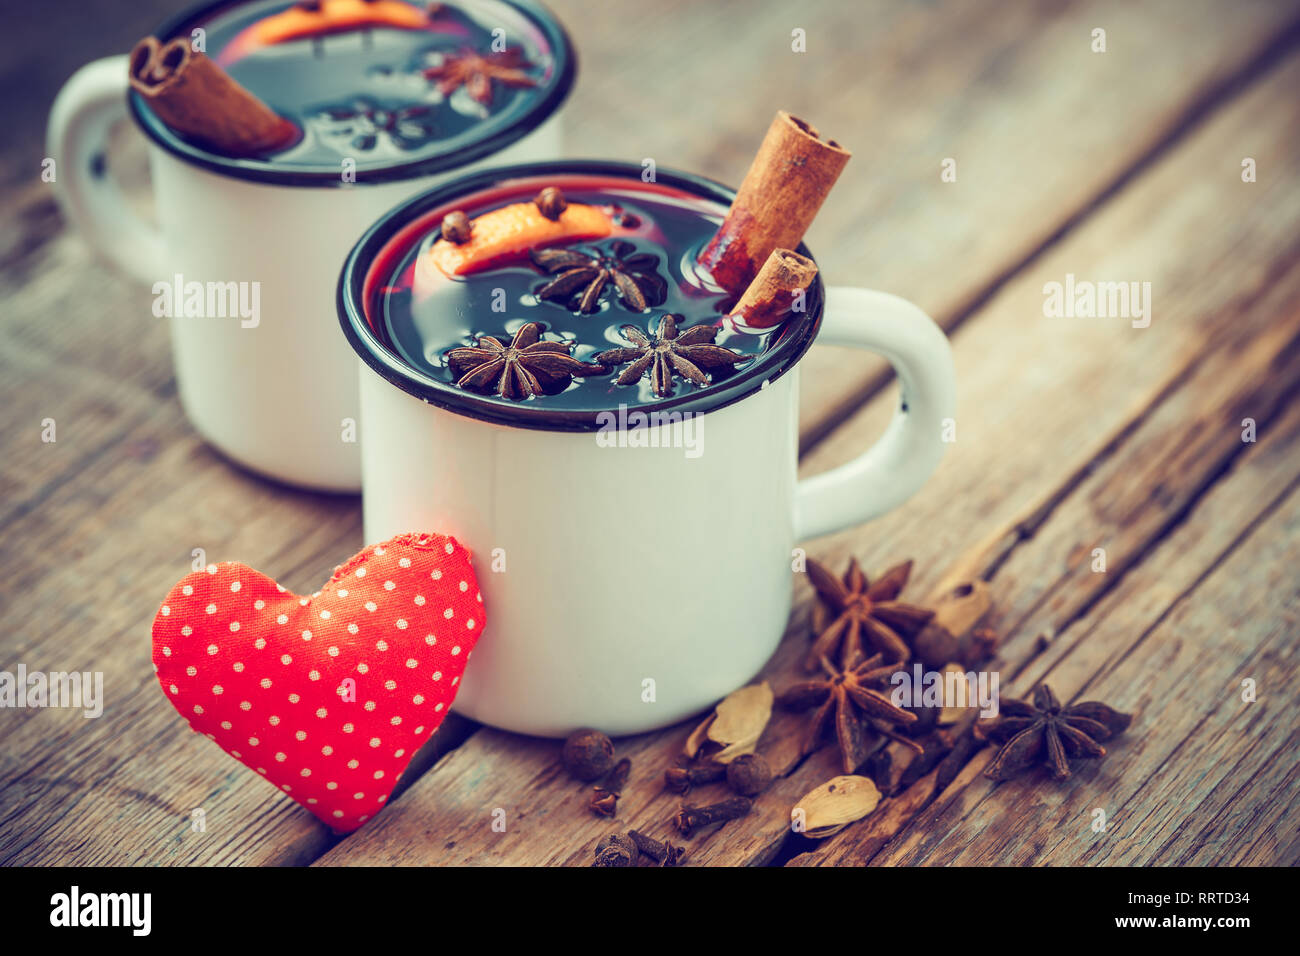 Mulled wine in mugs, red heart and spice on old wooden table. Retro styled. Stock Photo